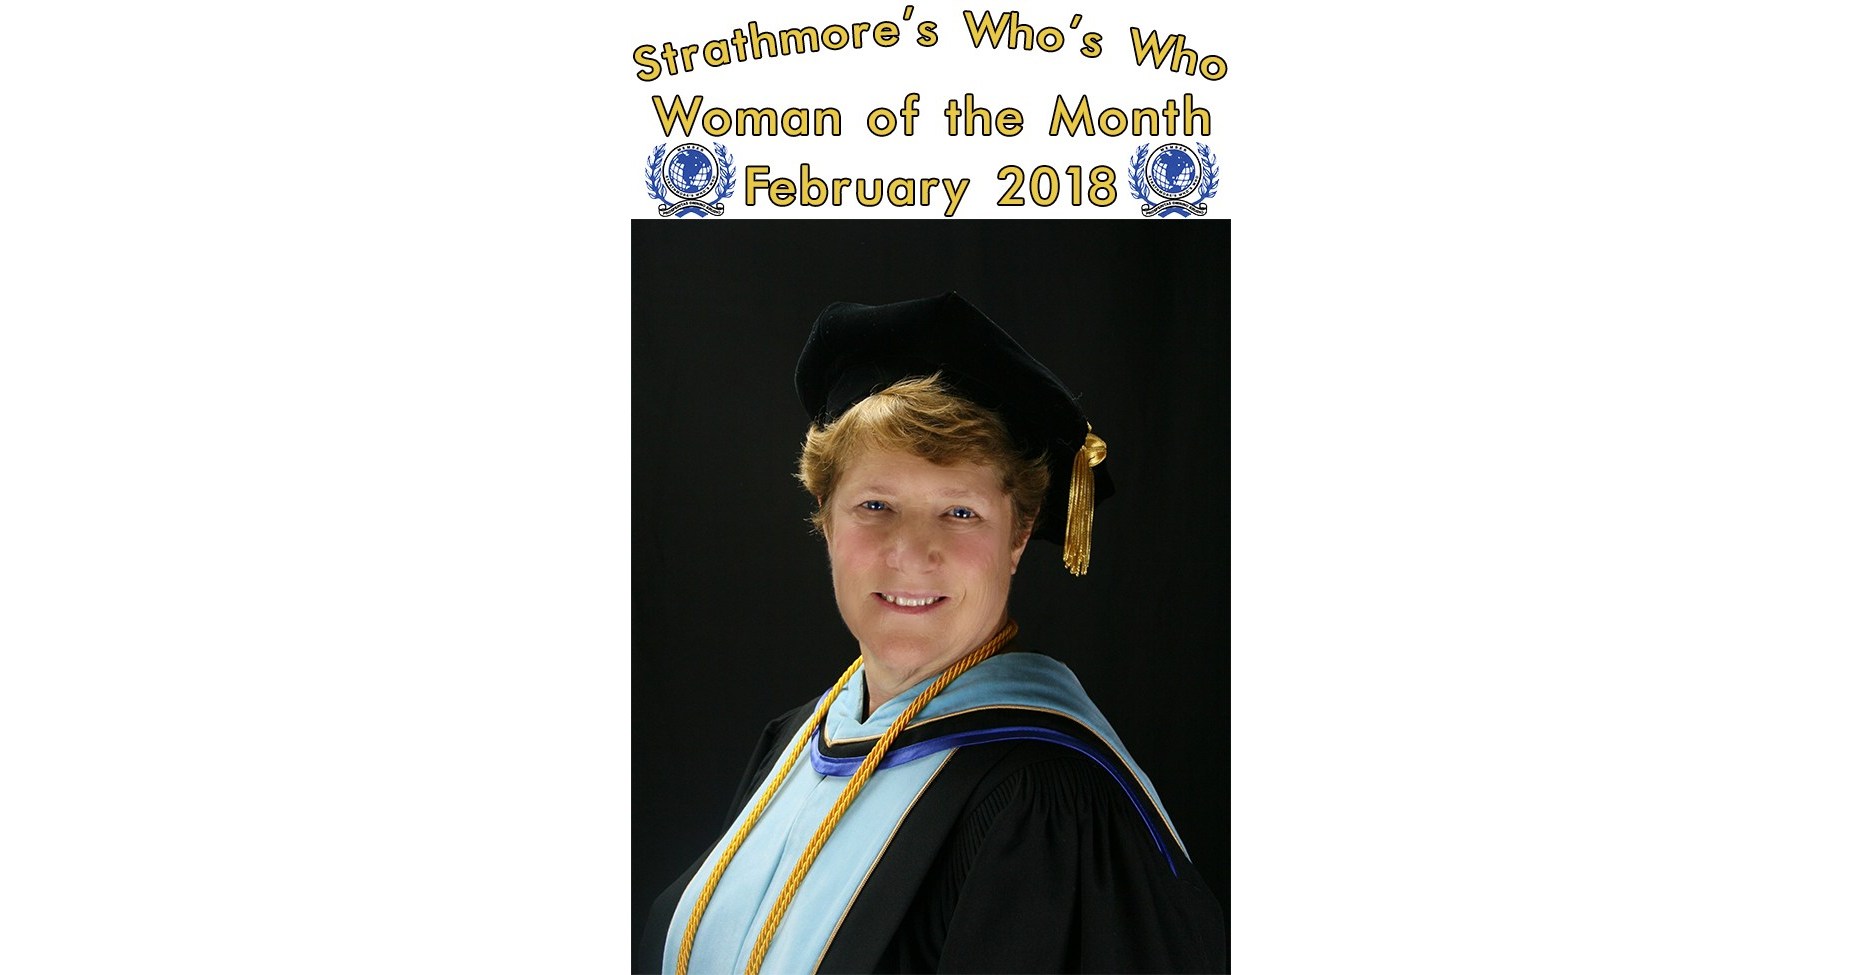 Dr. Barbara R. Taber to be Honored as Strathmore's Who's Who Woman of the Month, Inducted Into 2018 Top Female ... - PR Newswire (press release)